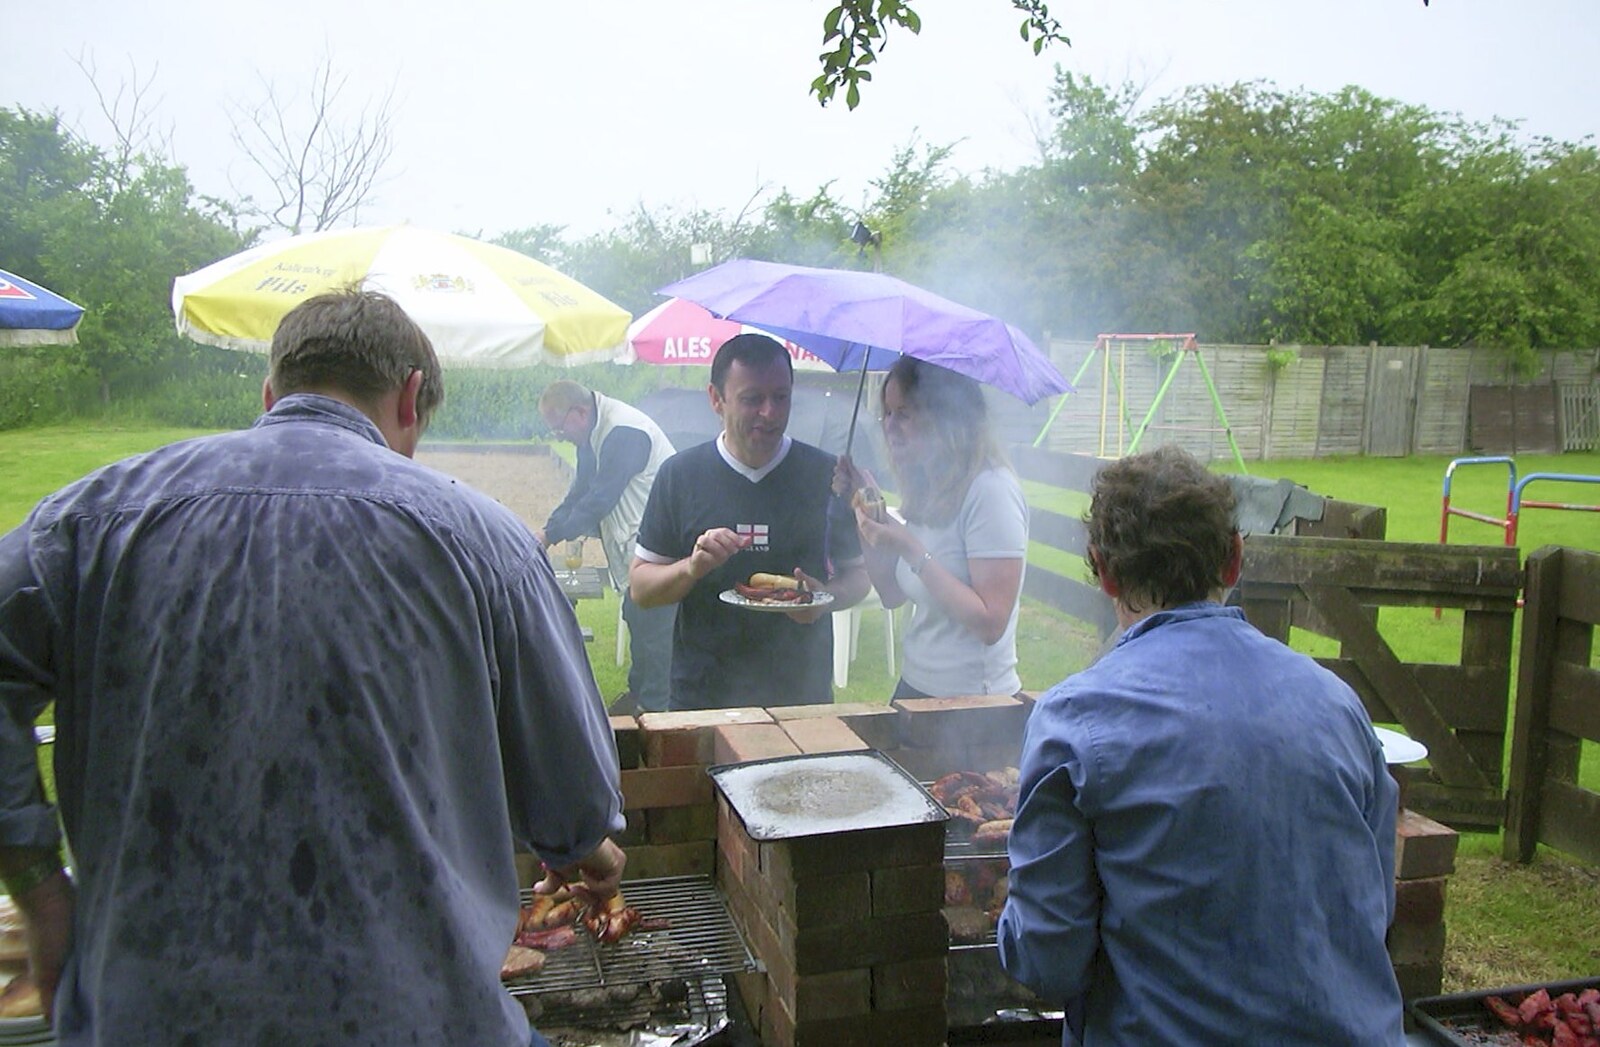 A Rainy Barbeque at the Swan Inn, Brome, Suffolk - 15th June 2002: Ian and Lorraine swing by for food